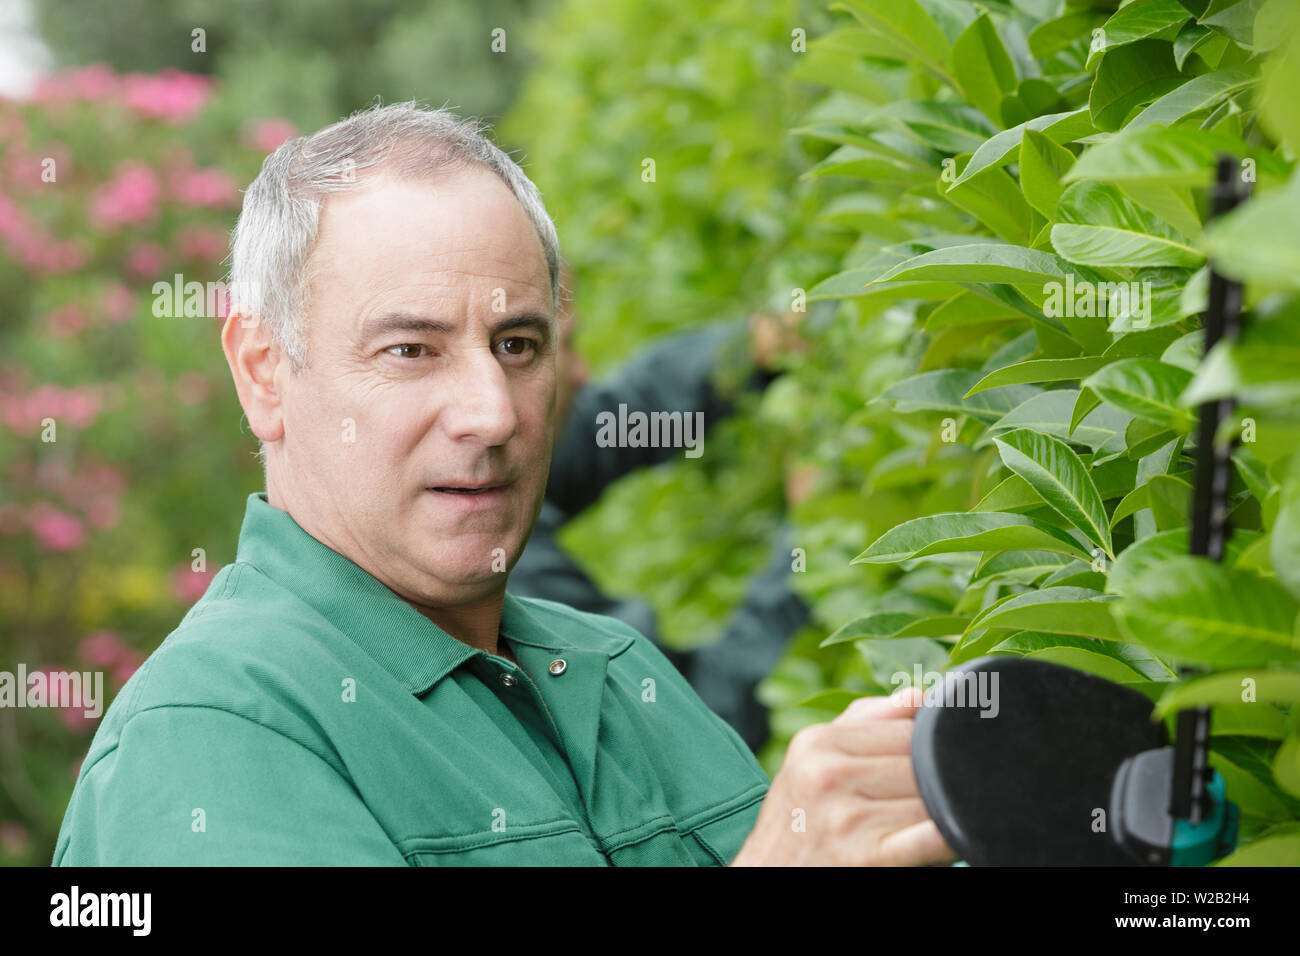 close view of mature man using hedge cutter Stock Photo